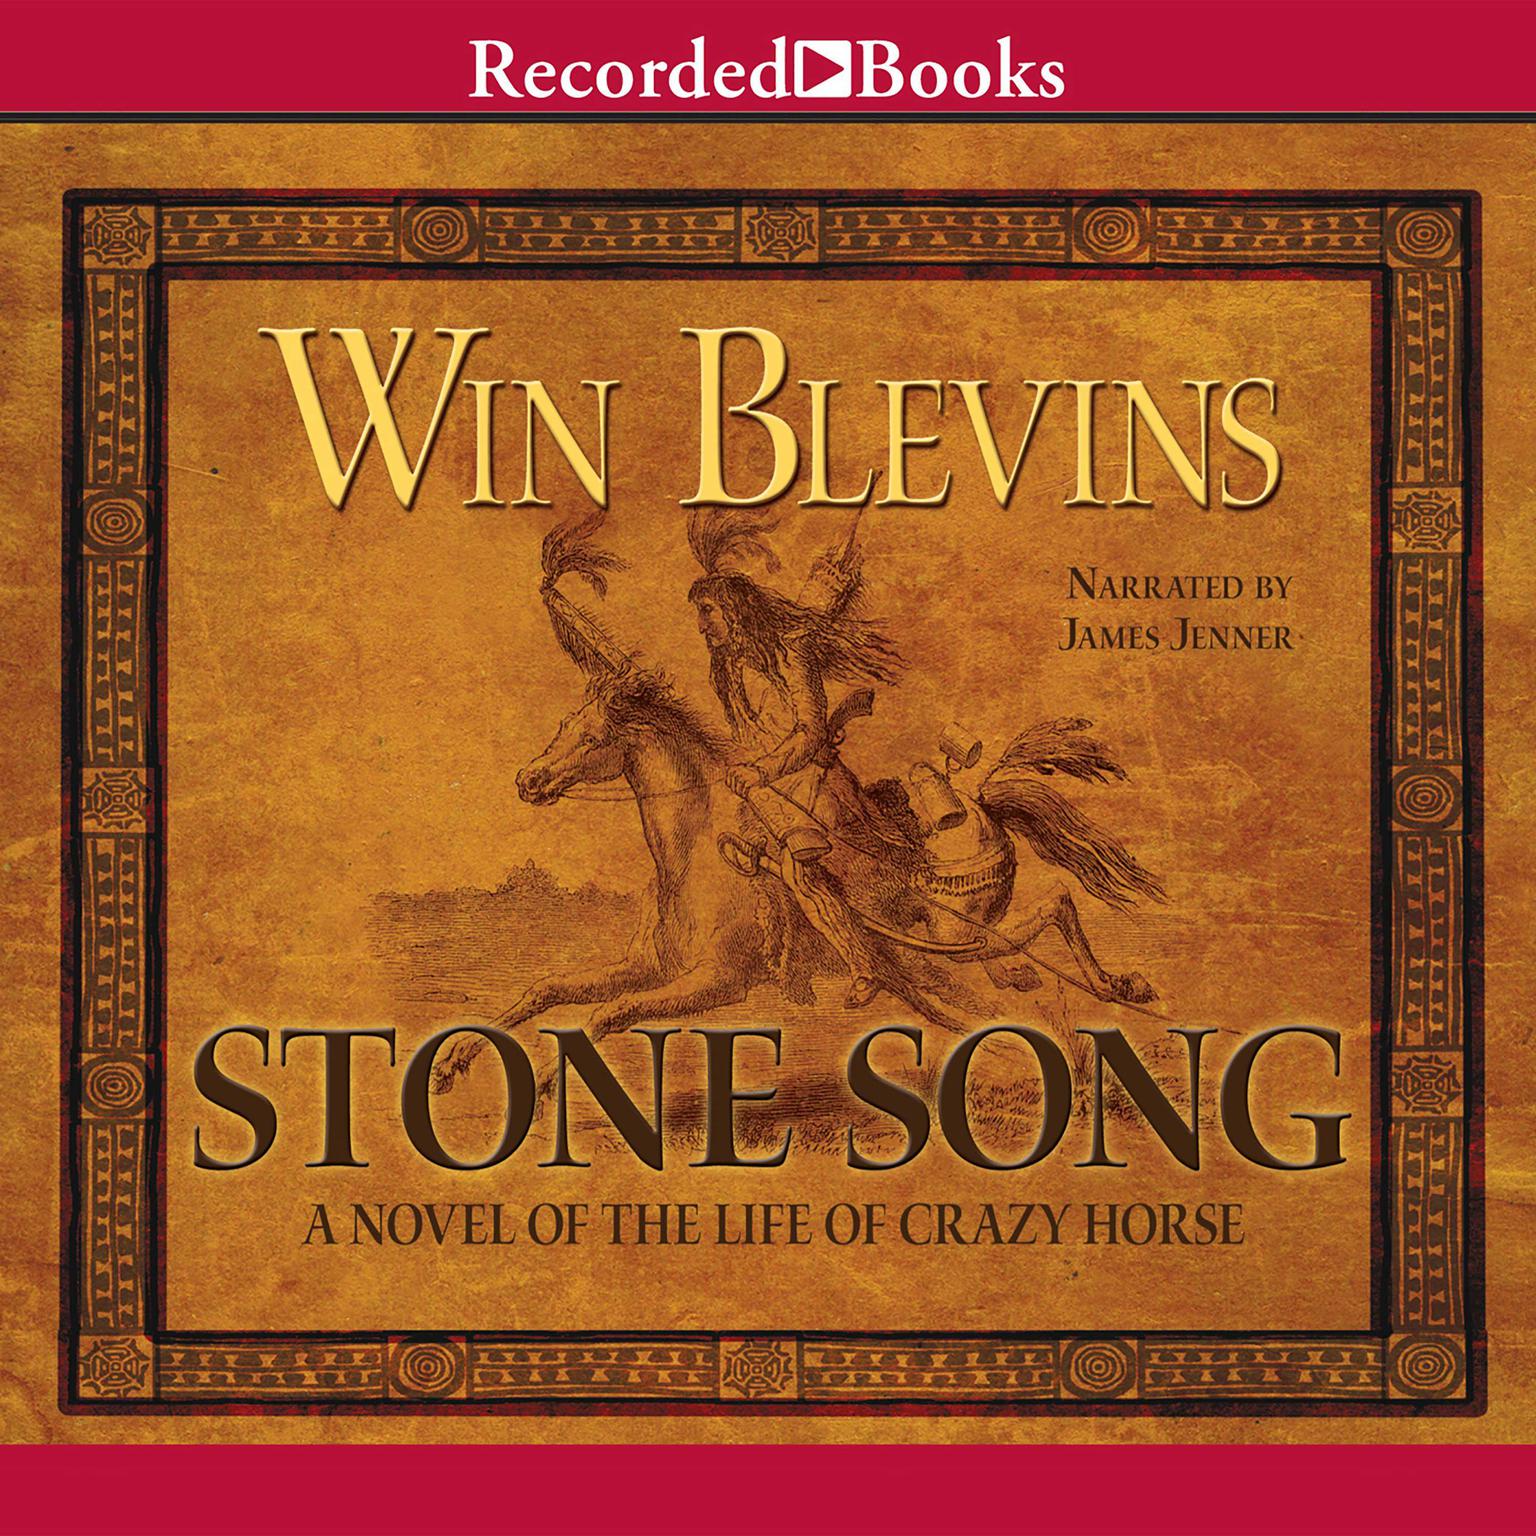 Stone Song: A Novel of the Life of Crazy Horse Audiobook, by Win Blevins